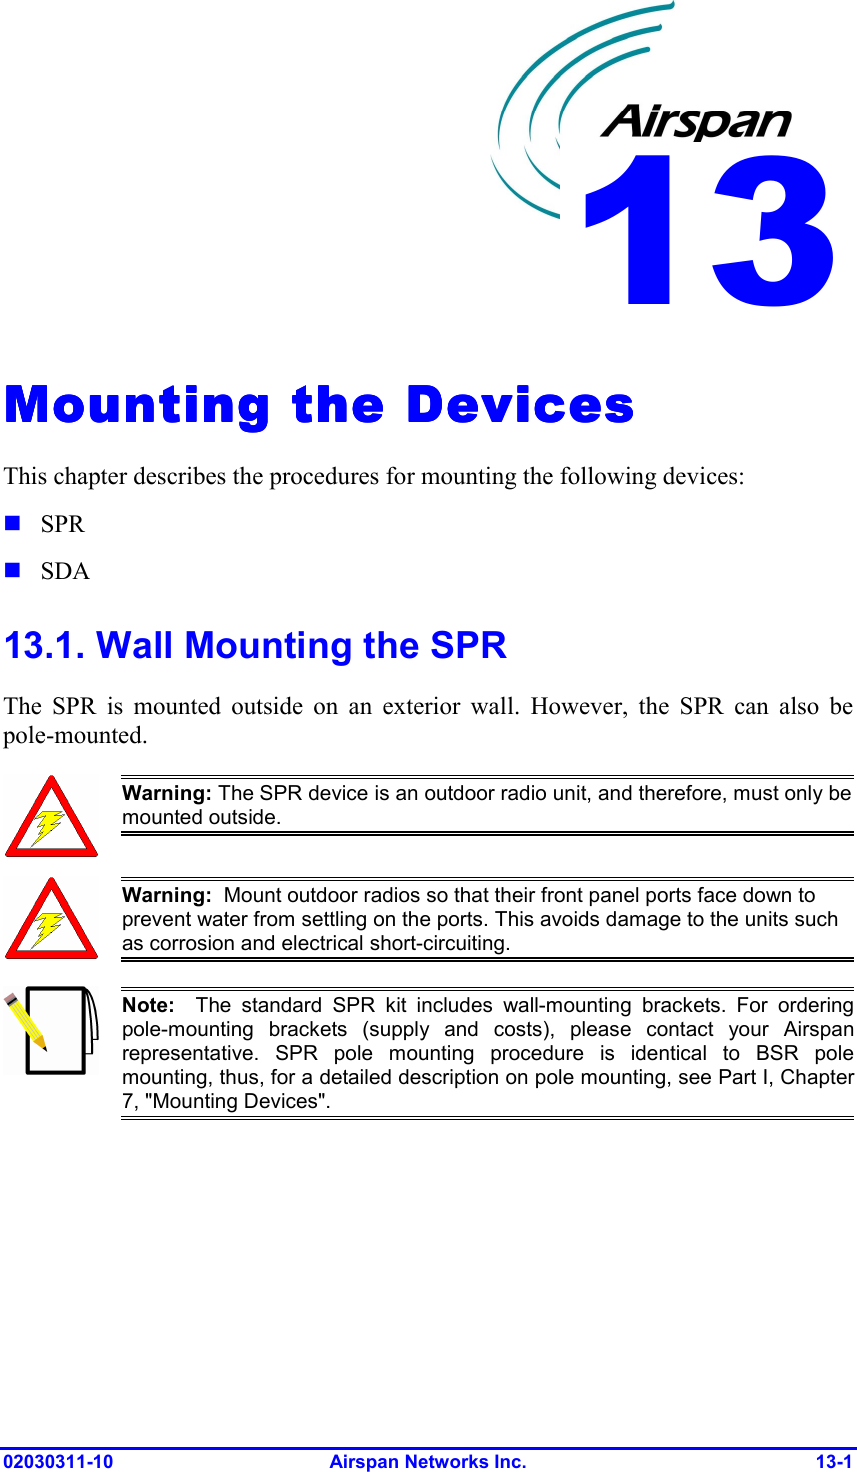  02030311-10 Airspan Networks Inc.  13-1 Mounting the DevicesMounting the DevicesMounting the DevicesMounting the Devices    This chapter describes the procedures for mounting the following devices:  SPR  SDA 13.1. Wall Mounting the SPR The SPR is mounted outside on an exterior wall. However, the SPR can also be pole-mounted.   Warning: The SPR device is an outdoor radio unit, and therefore, must only be mounted outside.  Warning:  Mount outdoor radios so that their front panel ports face down to prevent water from settling on the ports. This avoids damage to the units such as corrosion and electrical short-circuiting.  Note:  The standard SPR kit includes wall-mounting brackets. For orderingpole-mounting brackets (supply and costs), please contact your Airspanrepresentative. SPR pole mounting procedure is identical to BSR polemounting, thus, for a detailed description on pole mounting, see Part I, Chapter7, &quot;Mounting Devices&quot;.  13